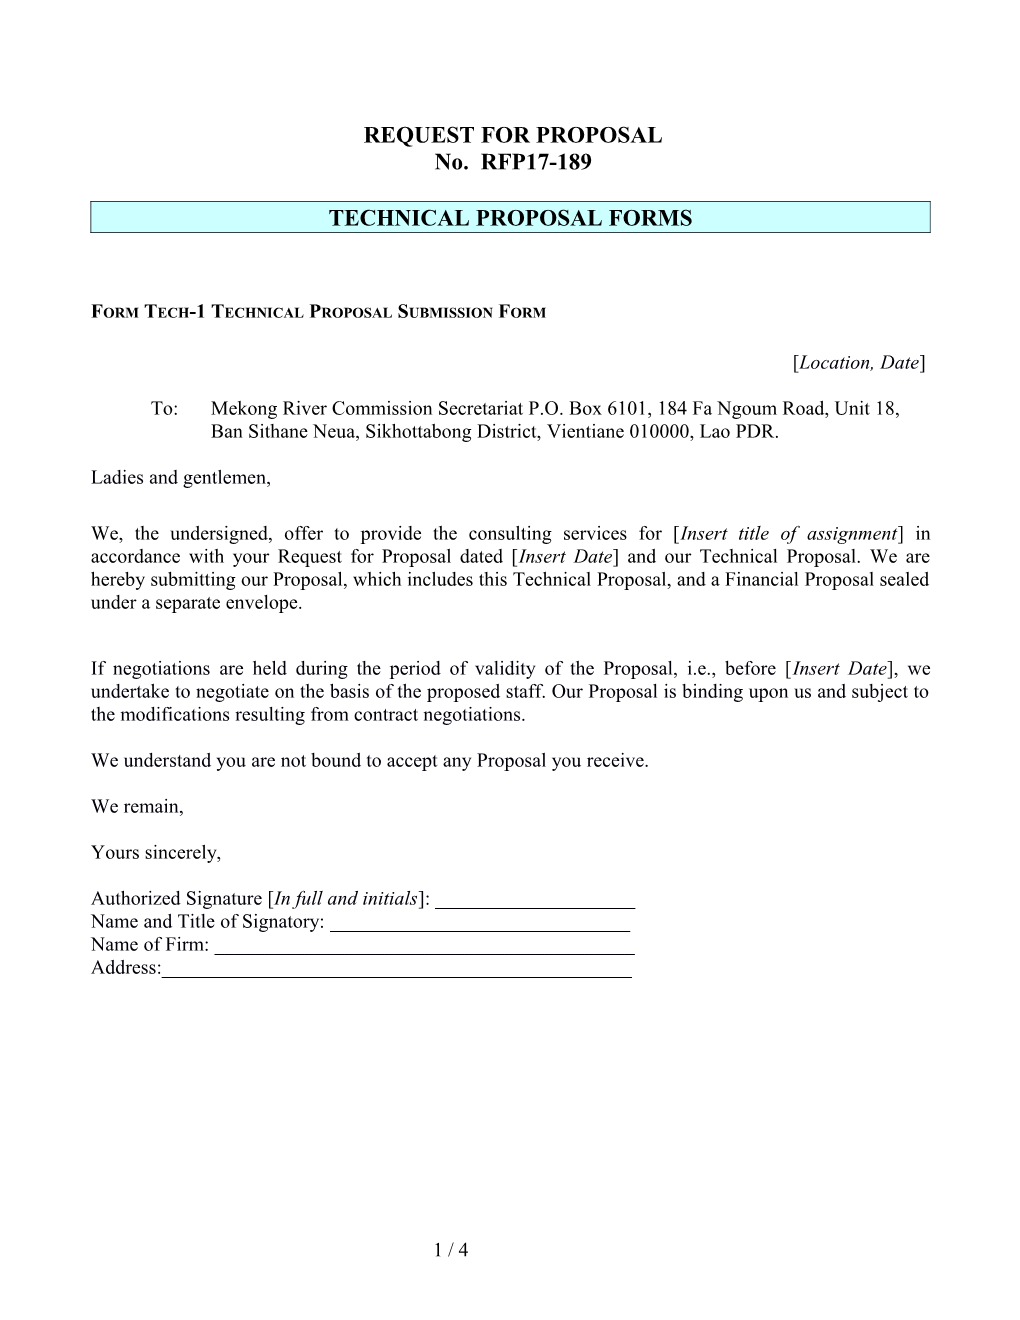 Form Tech-1 Technical Proposal Submission Form